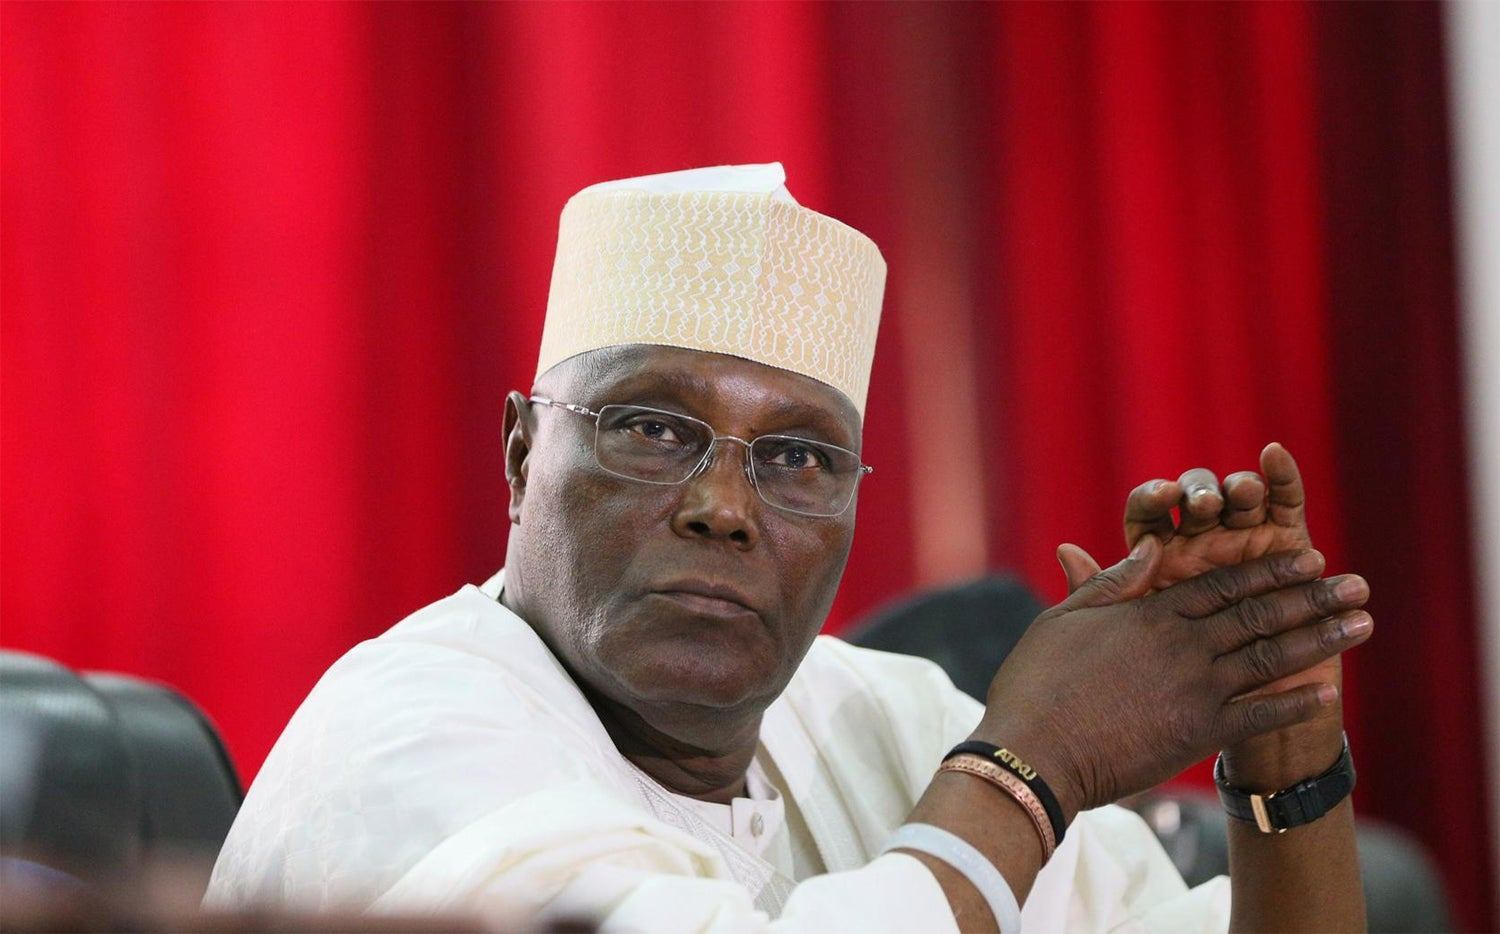 Niger Republic, Obi of Onitsha, Vice President Atiku Abubakar, the Peoples Democratic Party's Presidential Candidate in the 2023 election